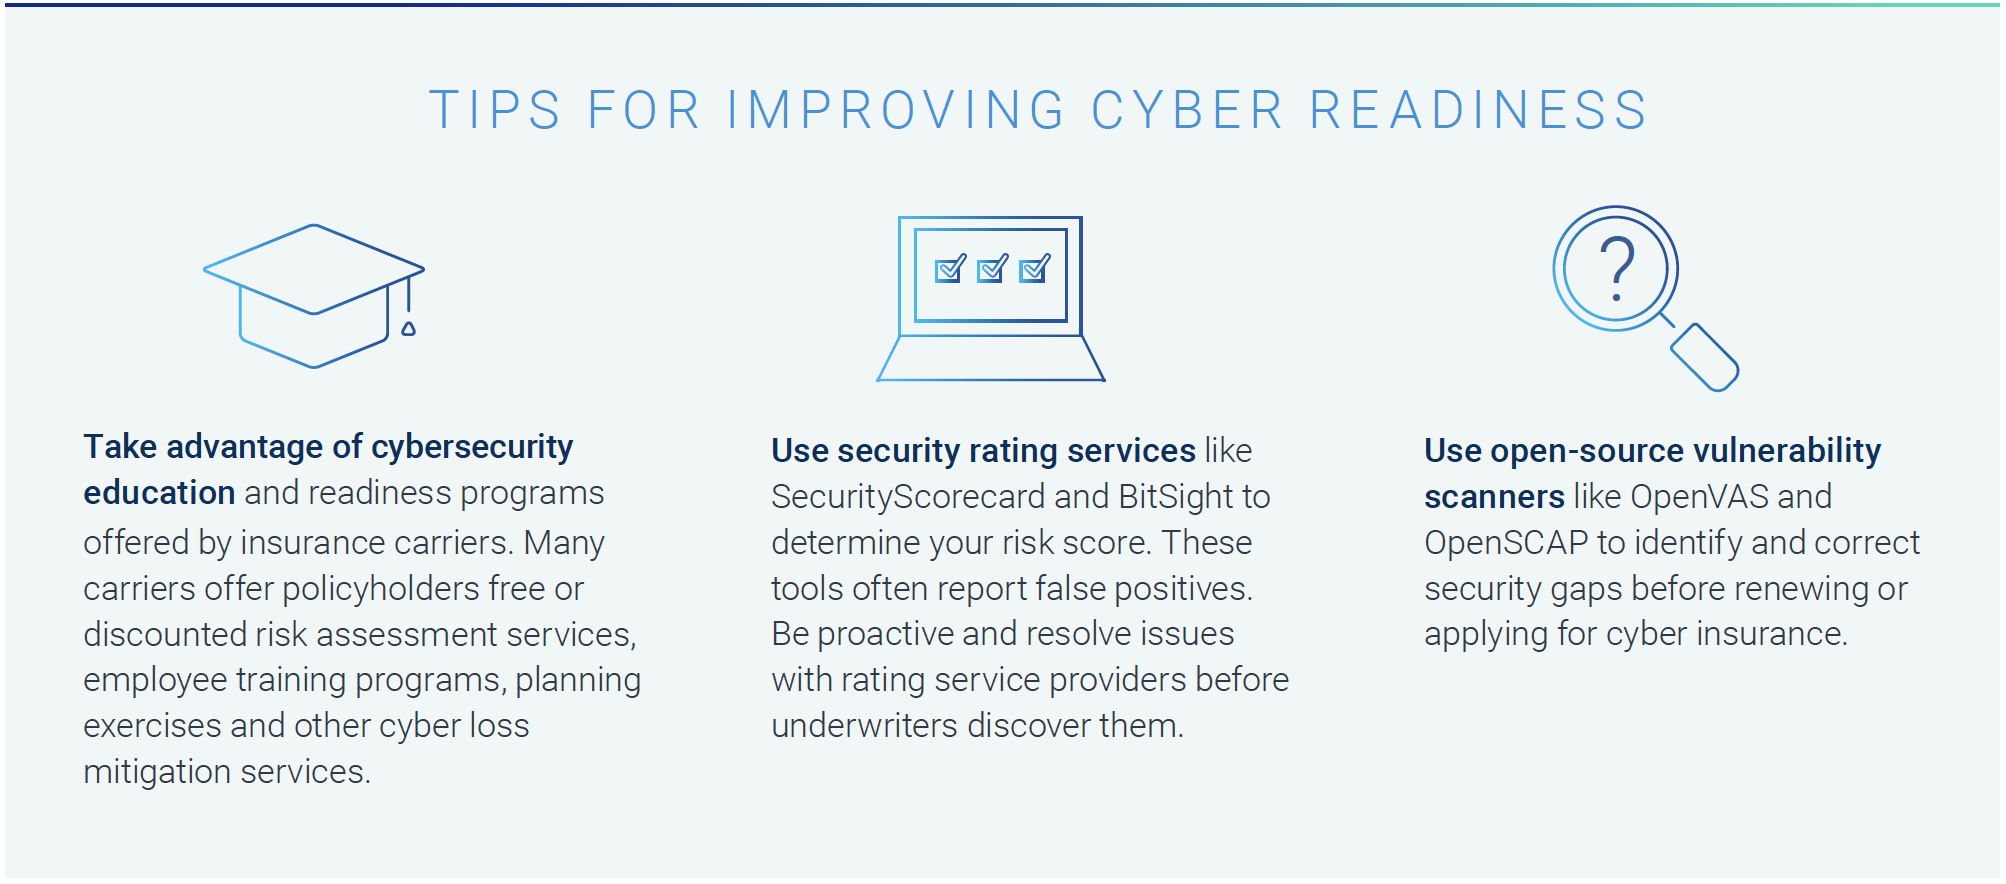 Graphic with tips for improving cyber readiness. They are: 1) Take advantage of cybersecurity education 2) Use security rating services 3) Use open-source vulnerability scanners. The graphic includes further details. 